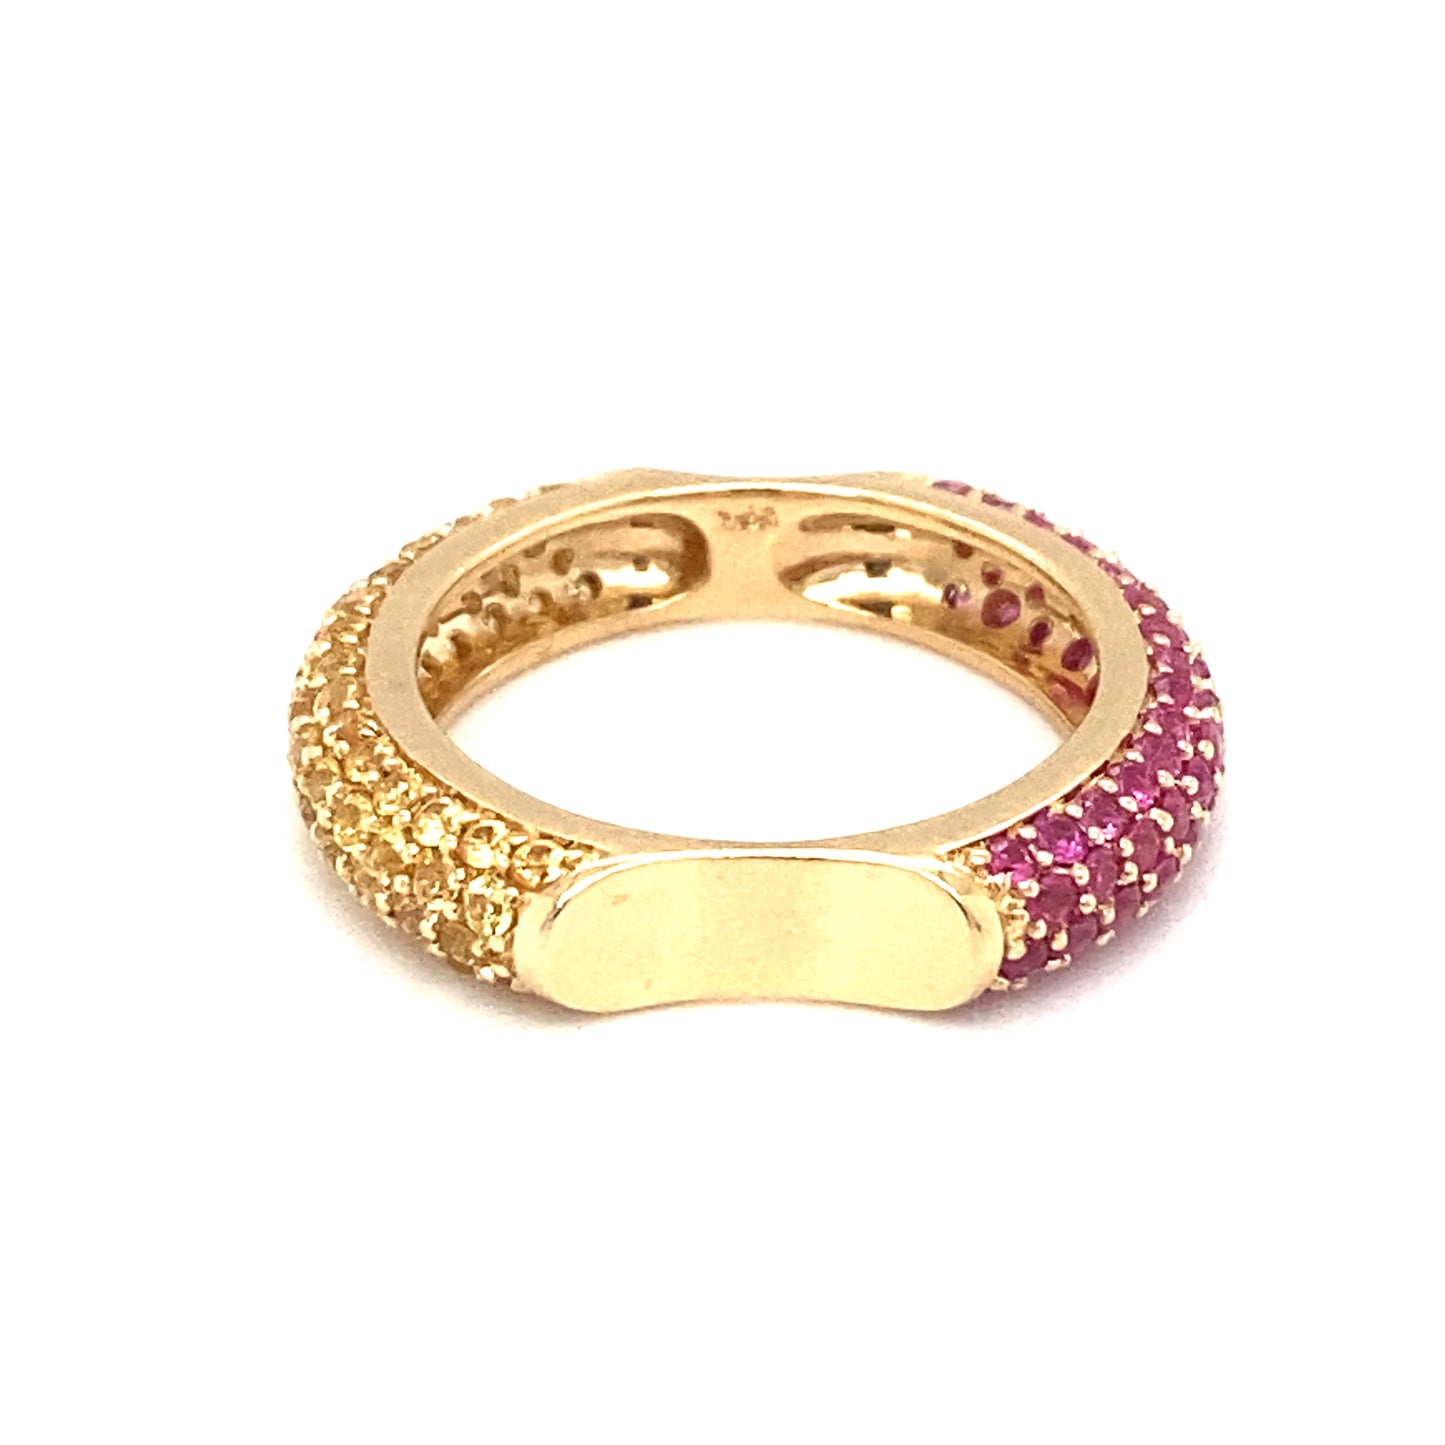 FENDI Couture Reversible Ring with Yellow and Pink Sapphires in 18K Gold